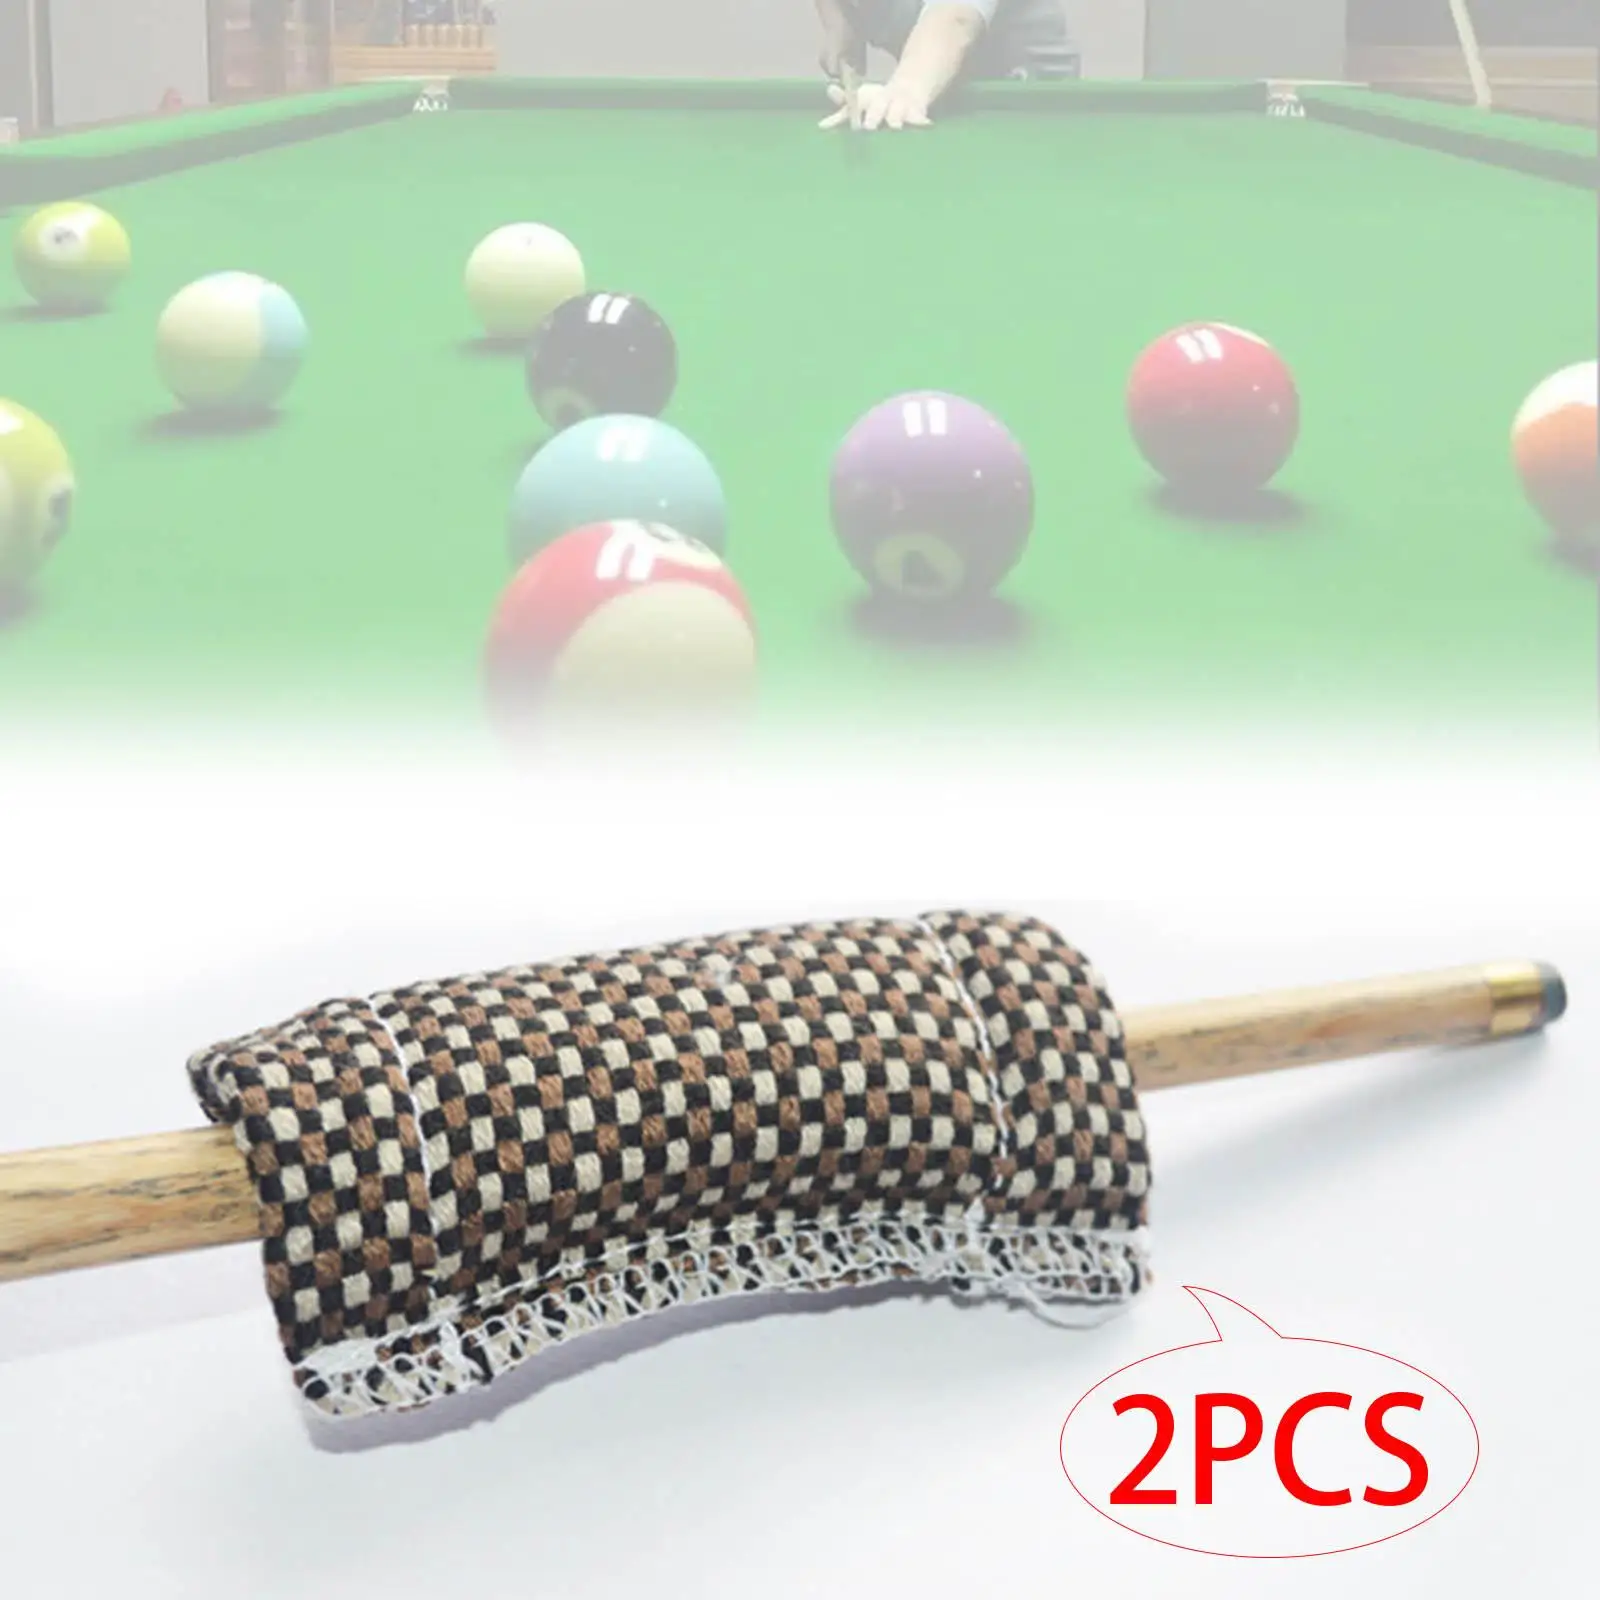 2Pcs Billiard Pool  Shaft Cloth  Shaft Polisher Burnisher Easy to Carry Wearable Soft Convenient  Cleaner Tool